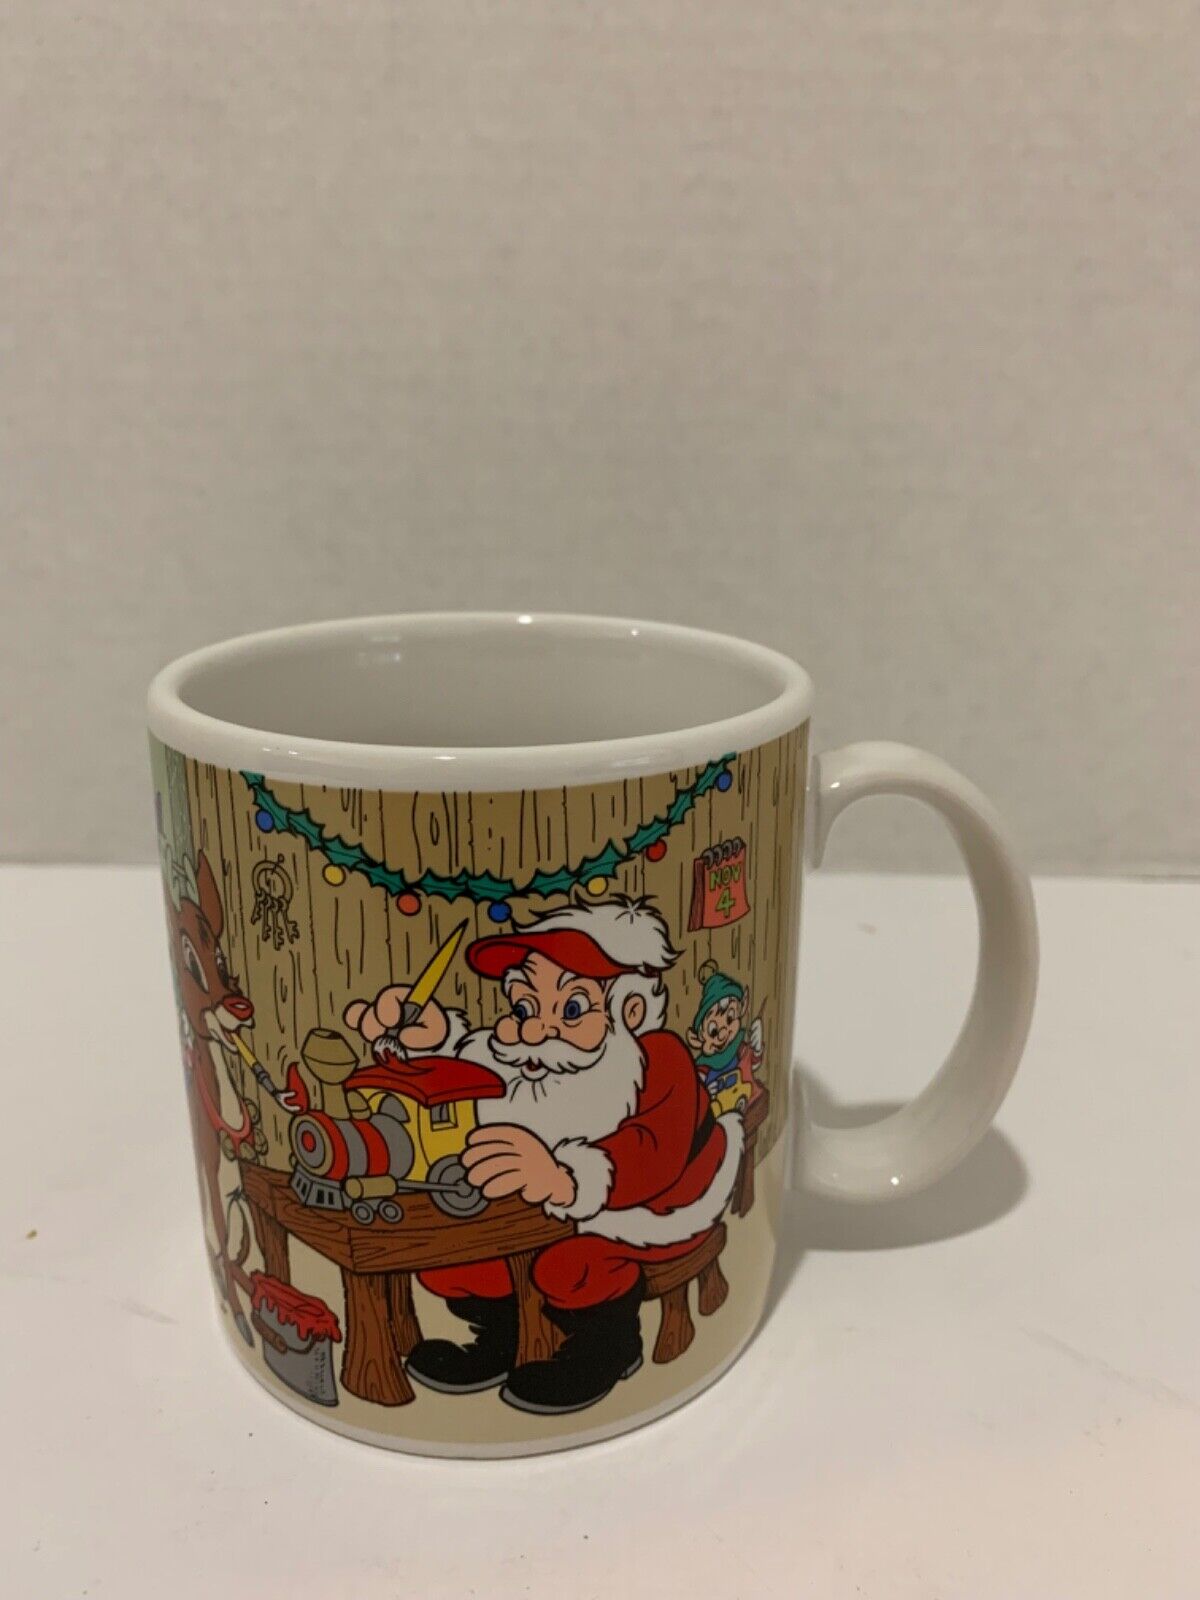 Christmas mug.  Rudolph the Red Nosed Reindeer by “Applsuse”, 1979